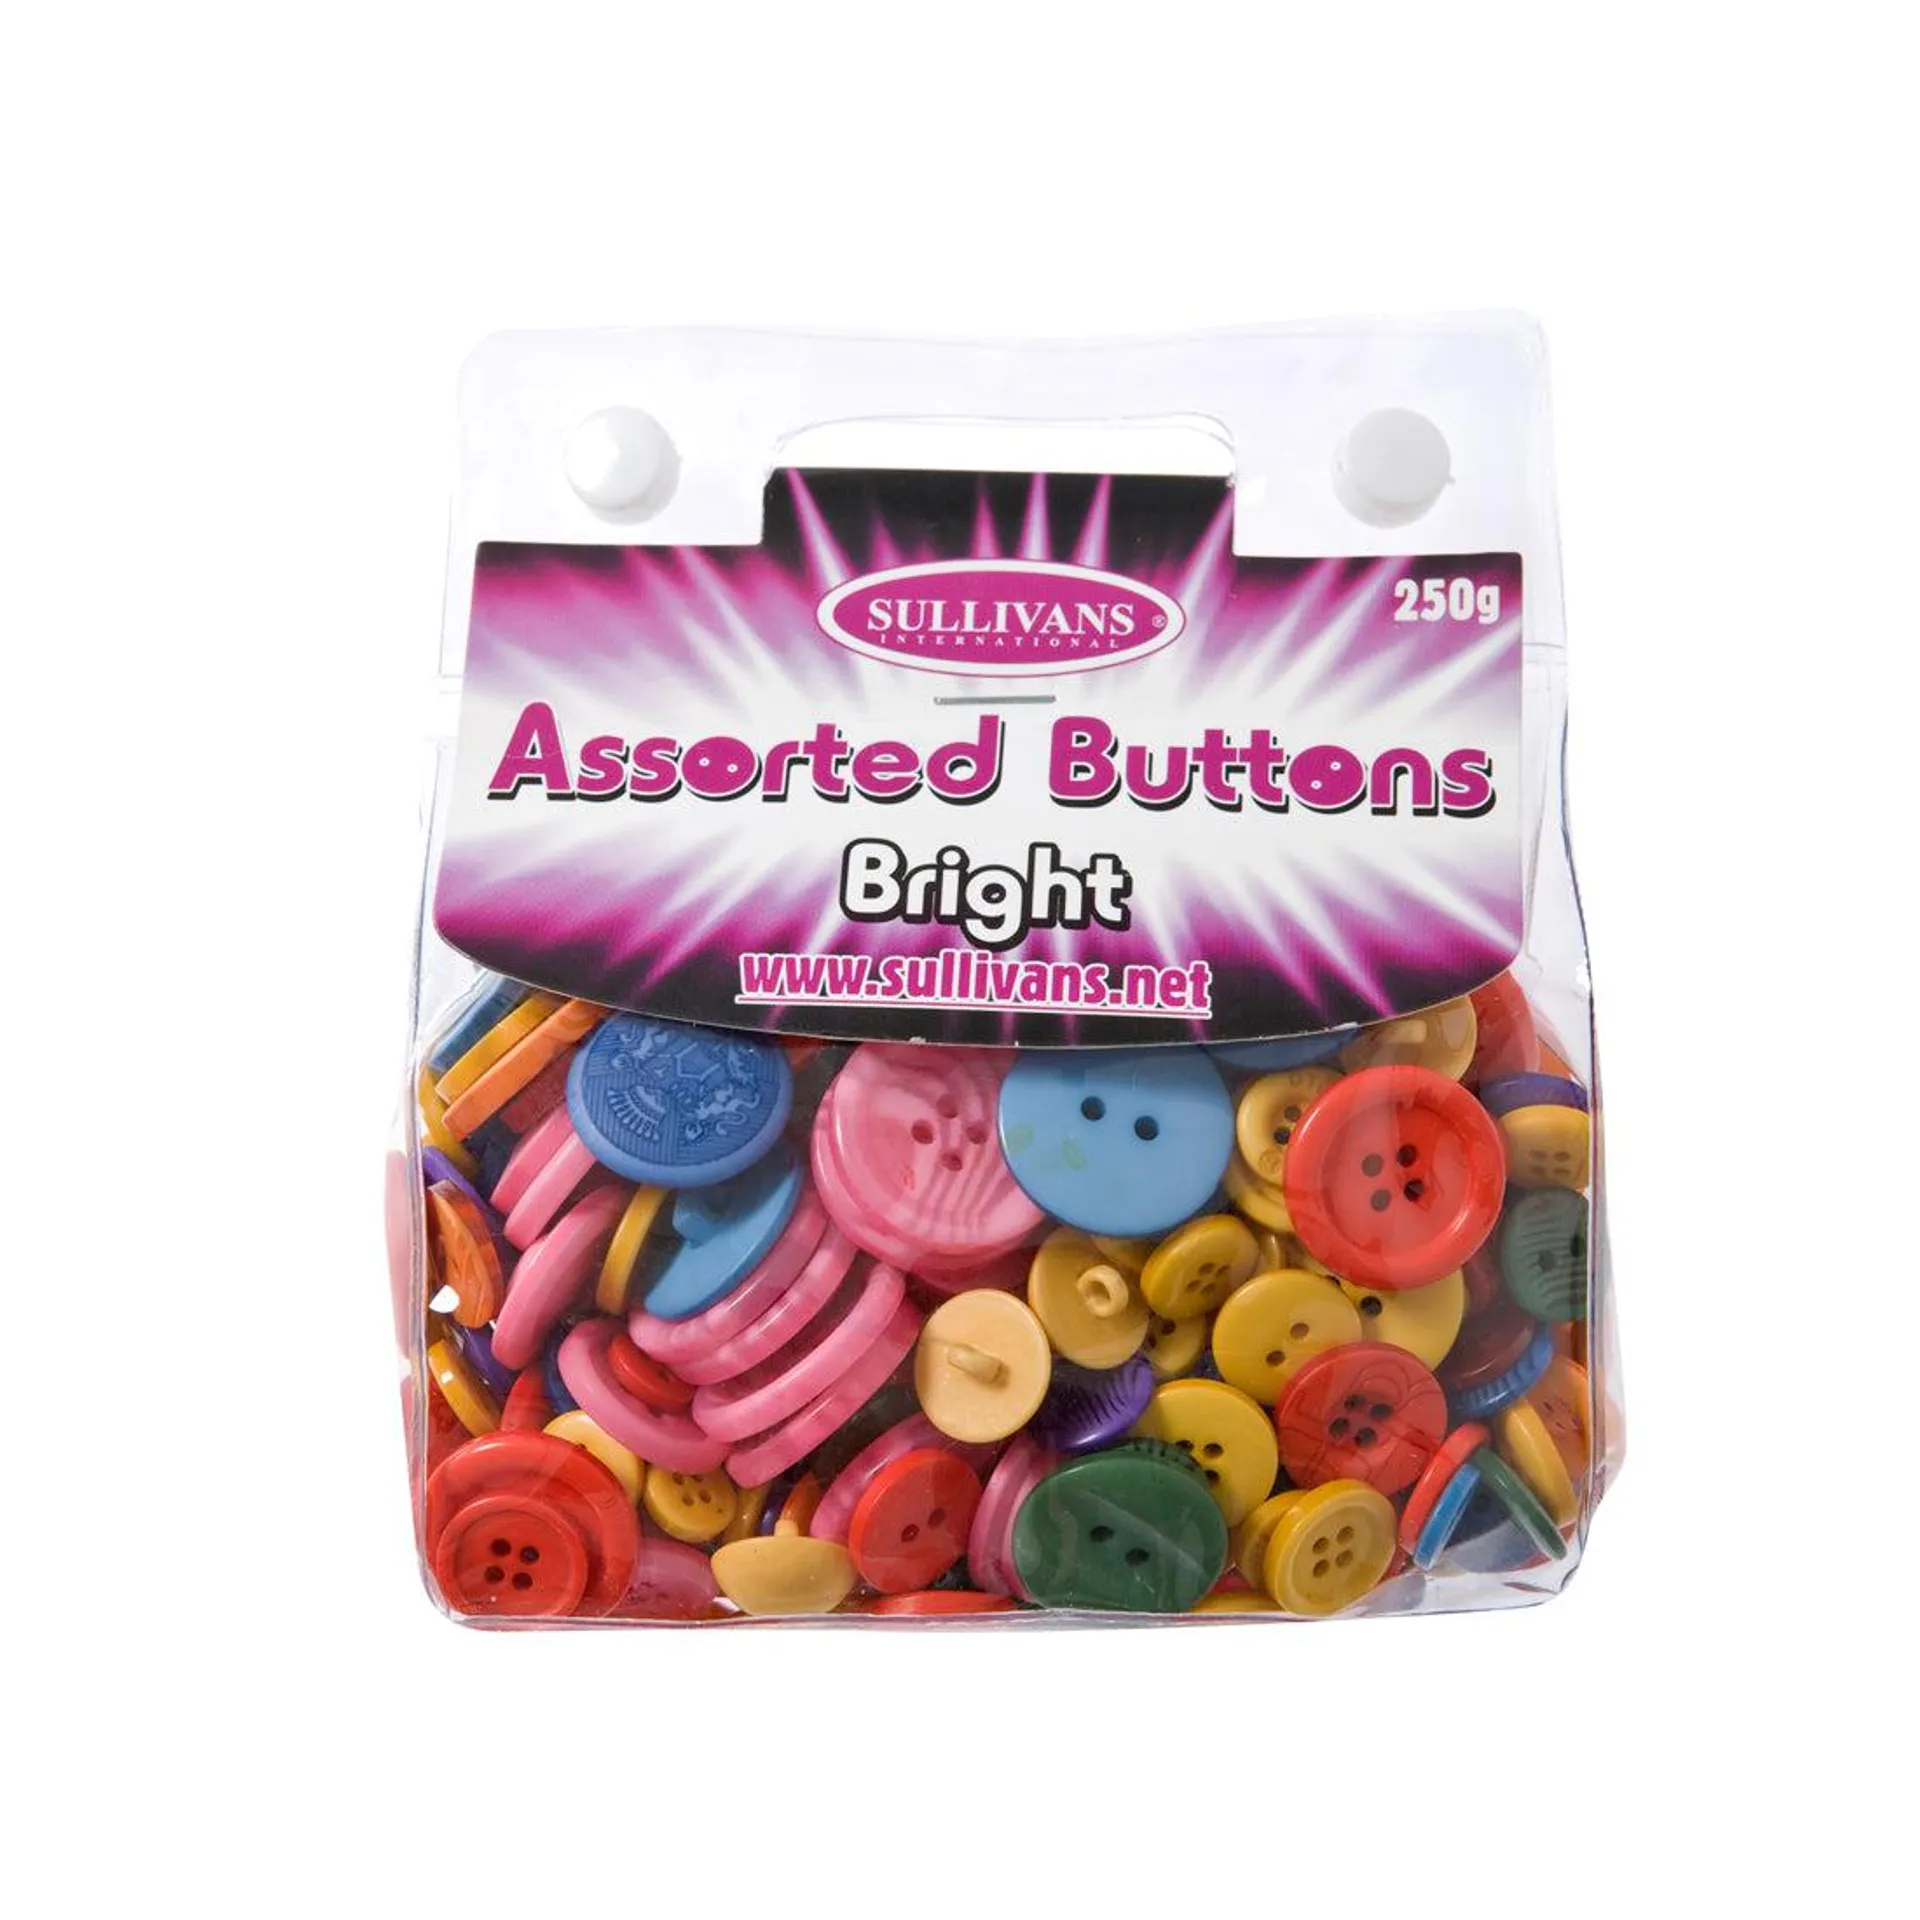 Bag of Assorted Buttons, Bright- 250g